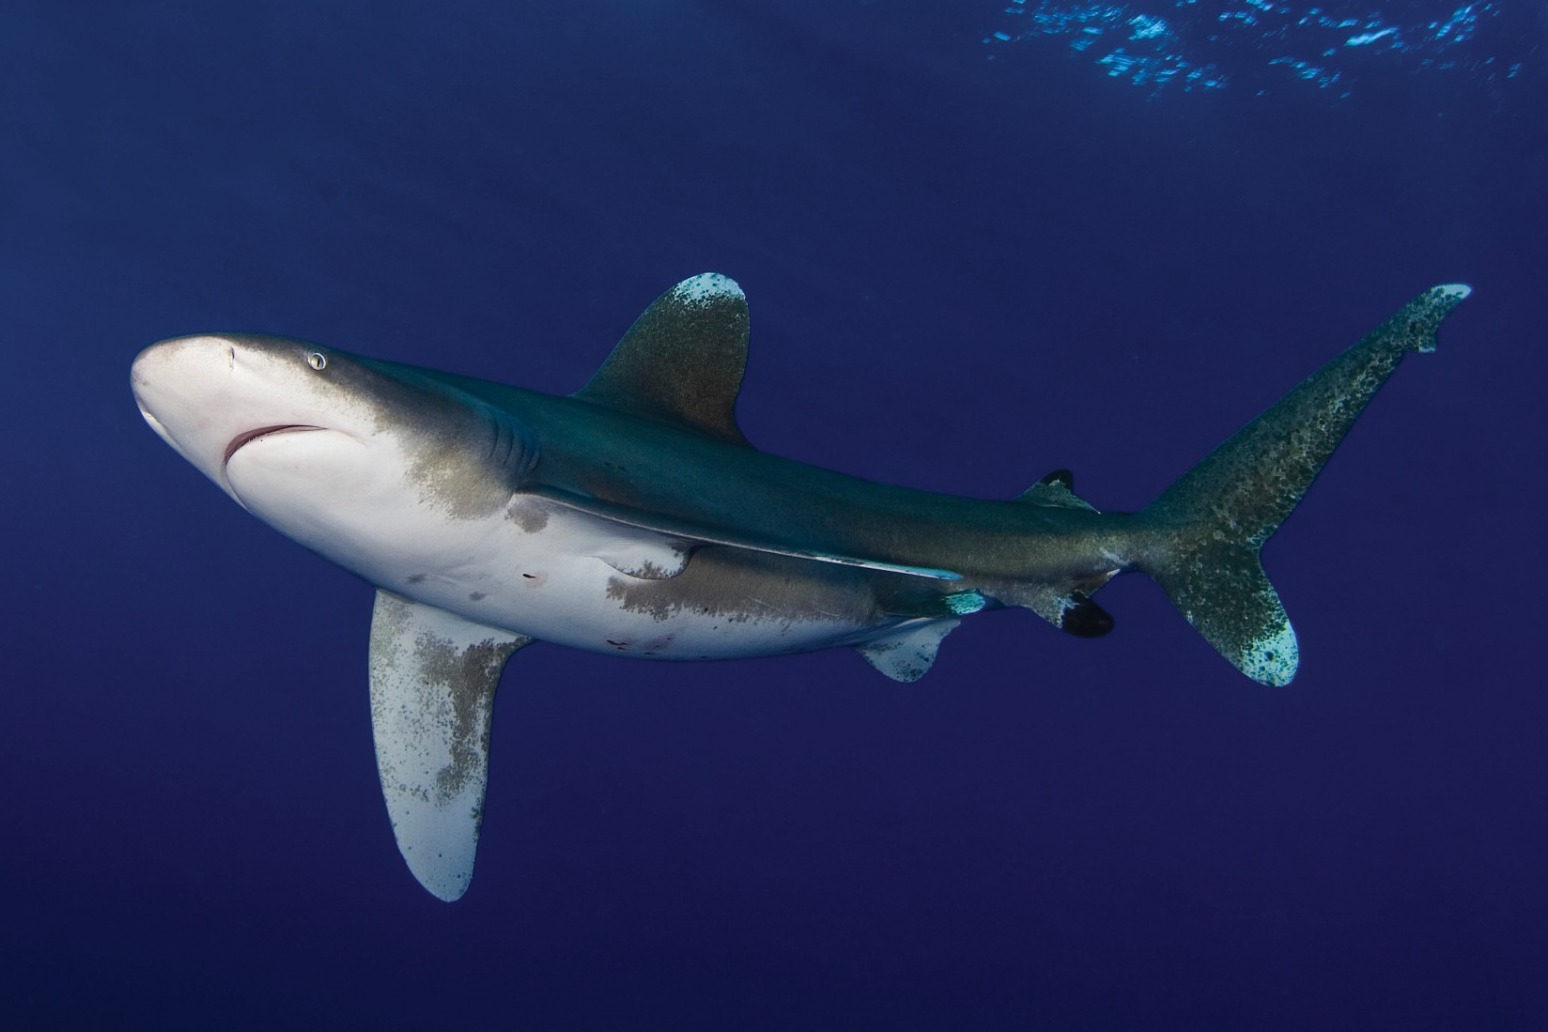 Great white sharks may have contributed to megalodon extinction, study suggests 